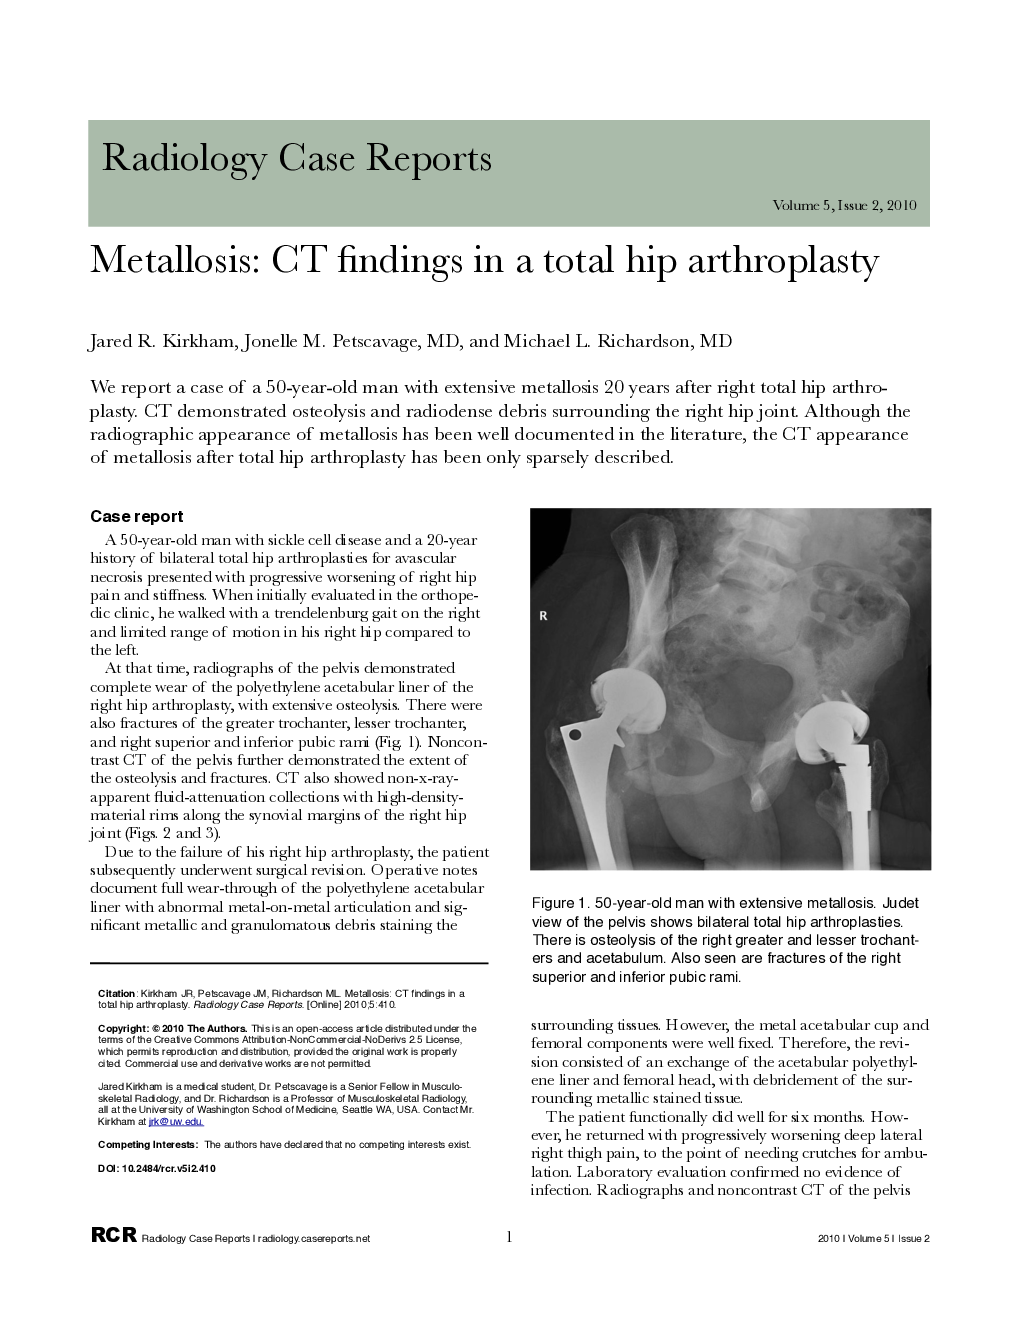 Metallosis: CT findings in a total hip arthroplasty